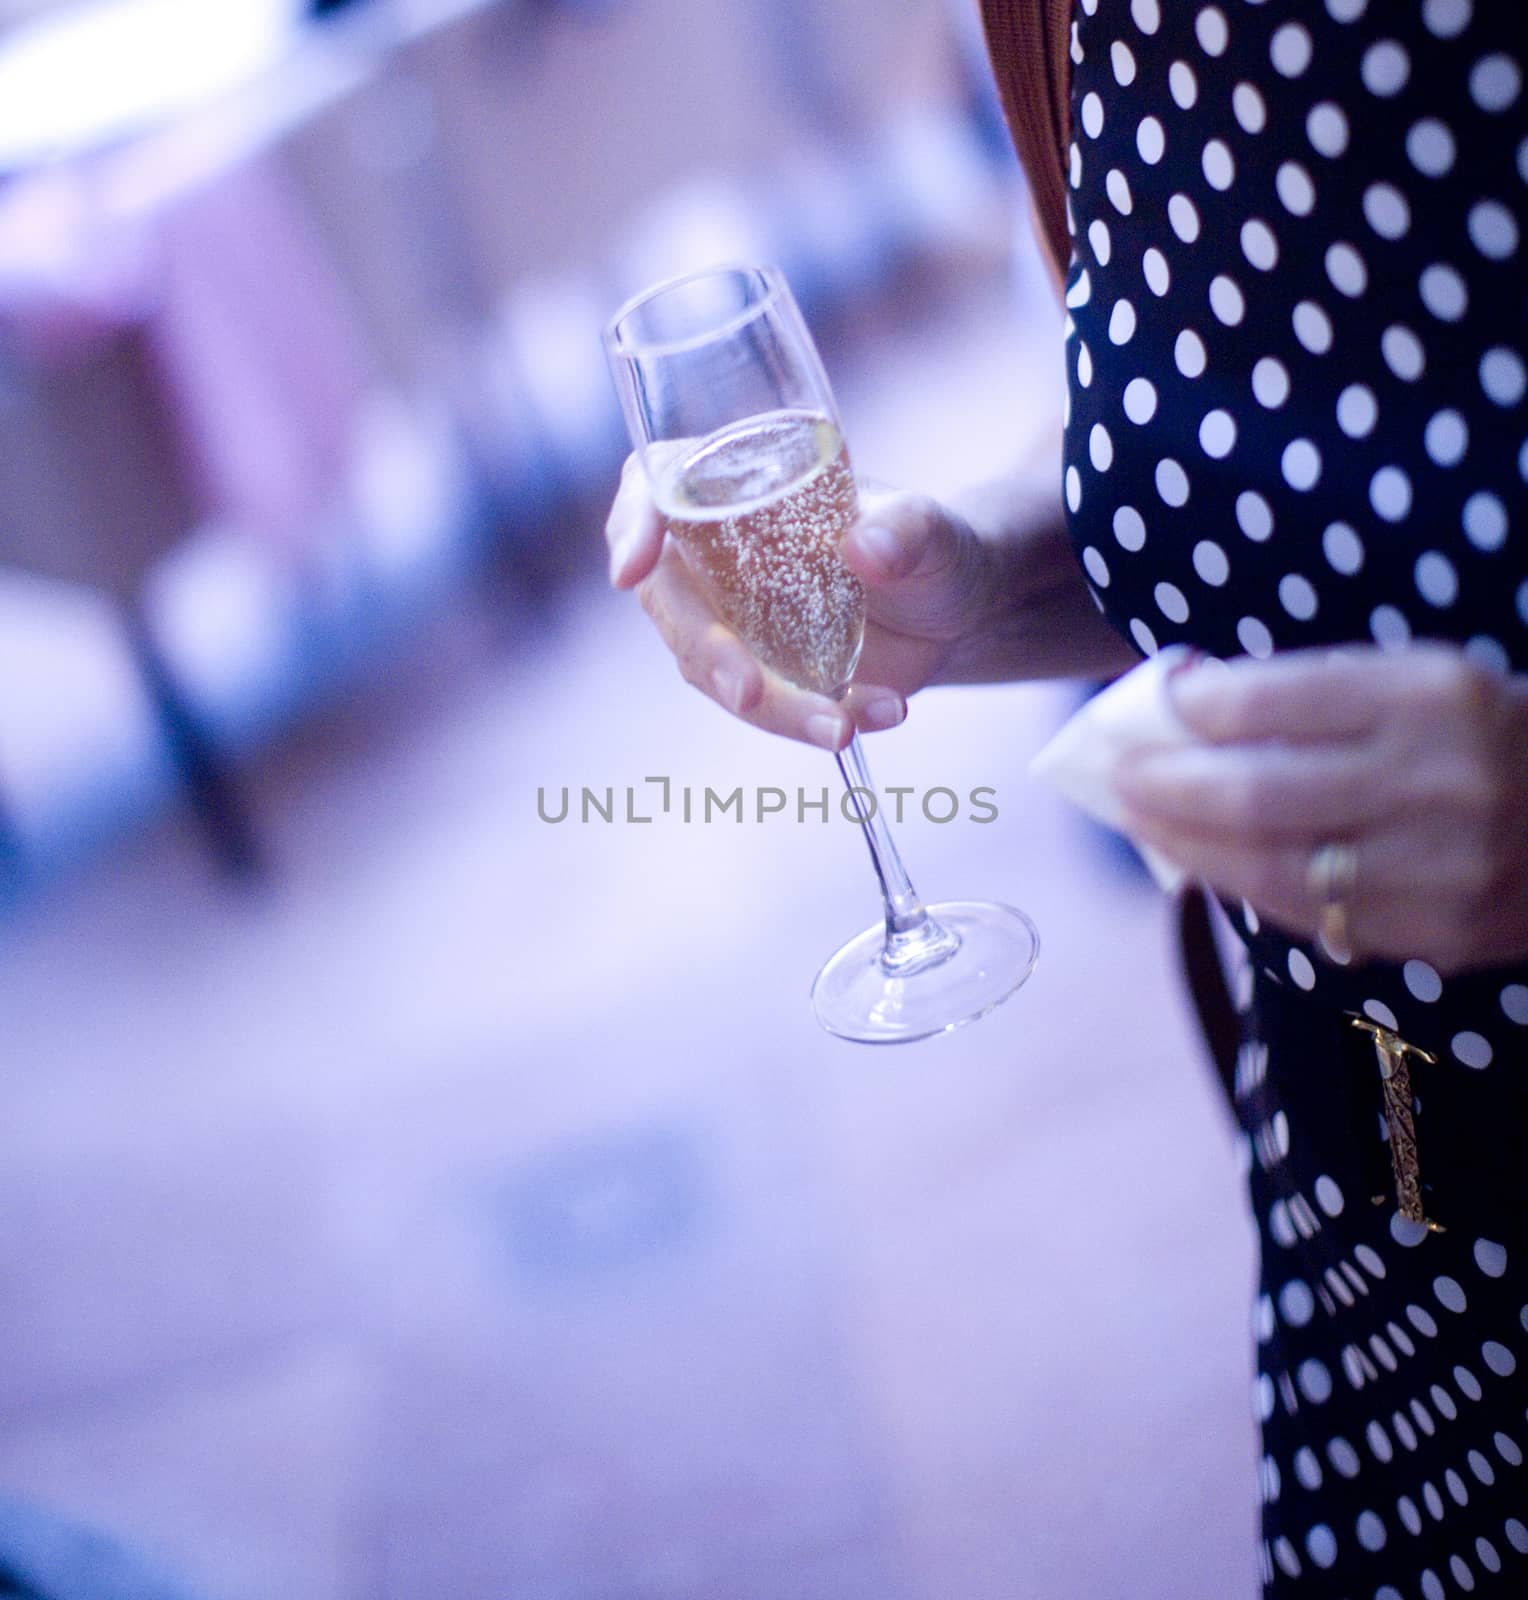 Champagne flute wine glass in hand of young woman female wedding guest with black and white spotty dress.